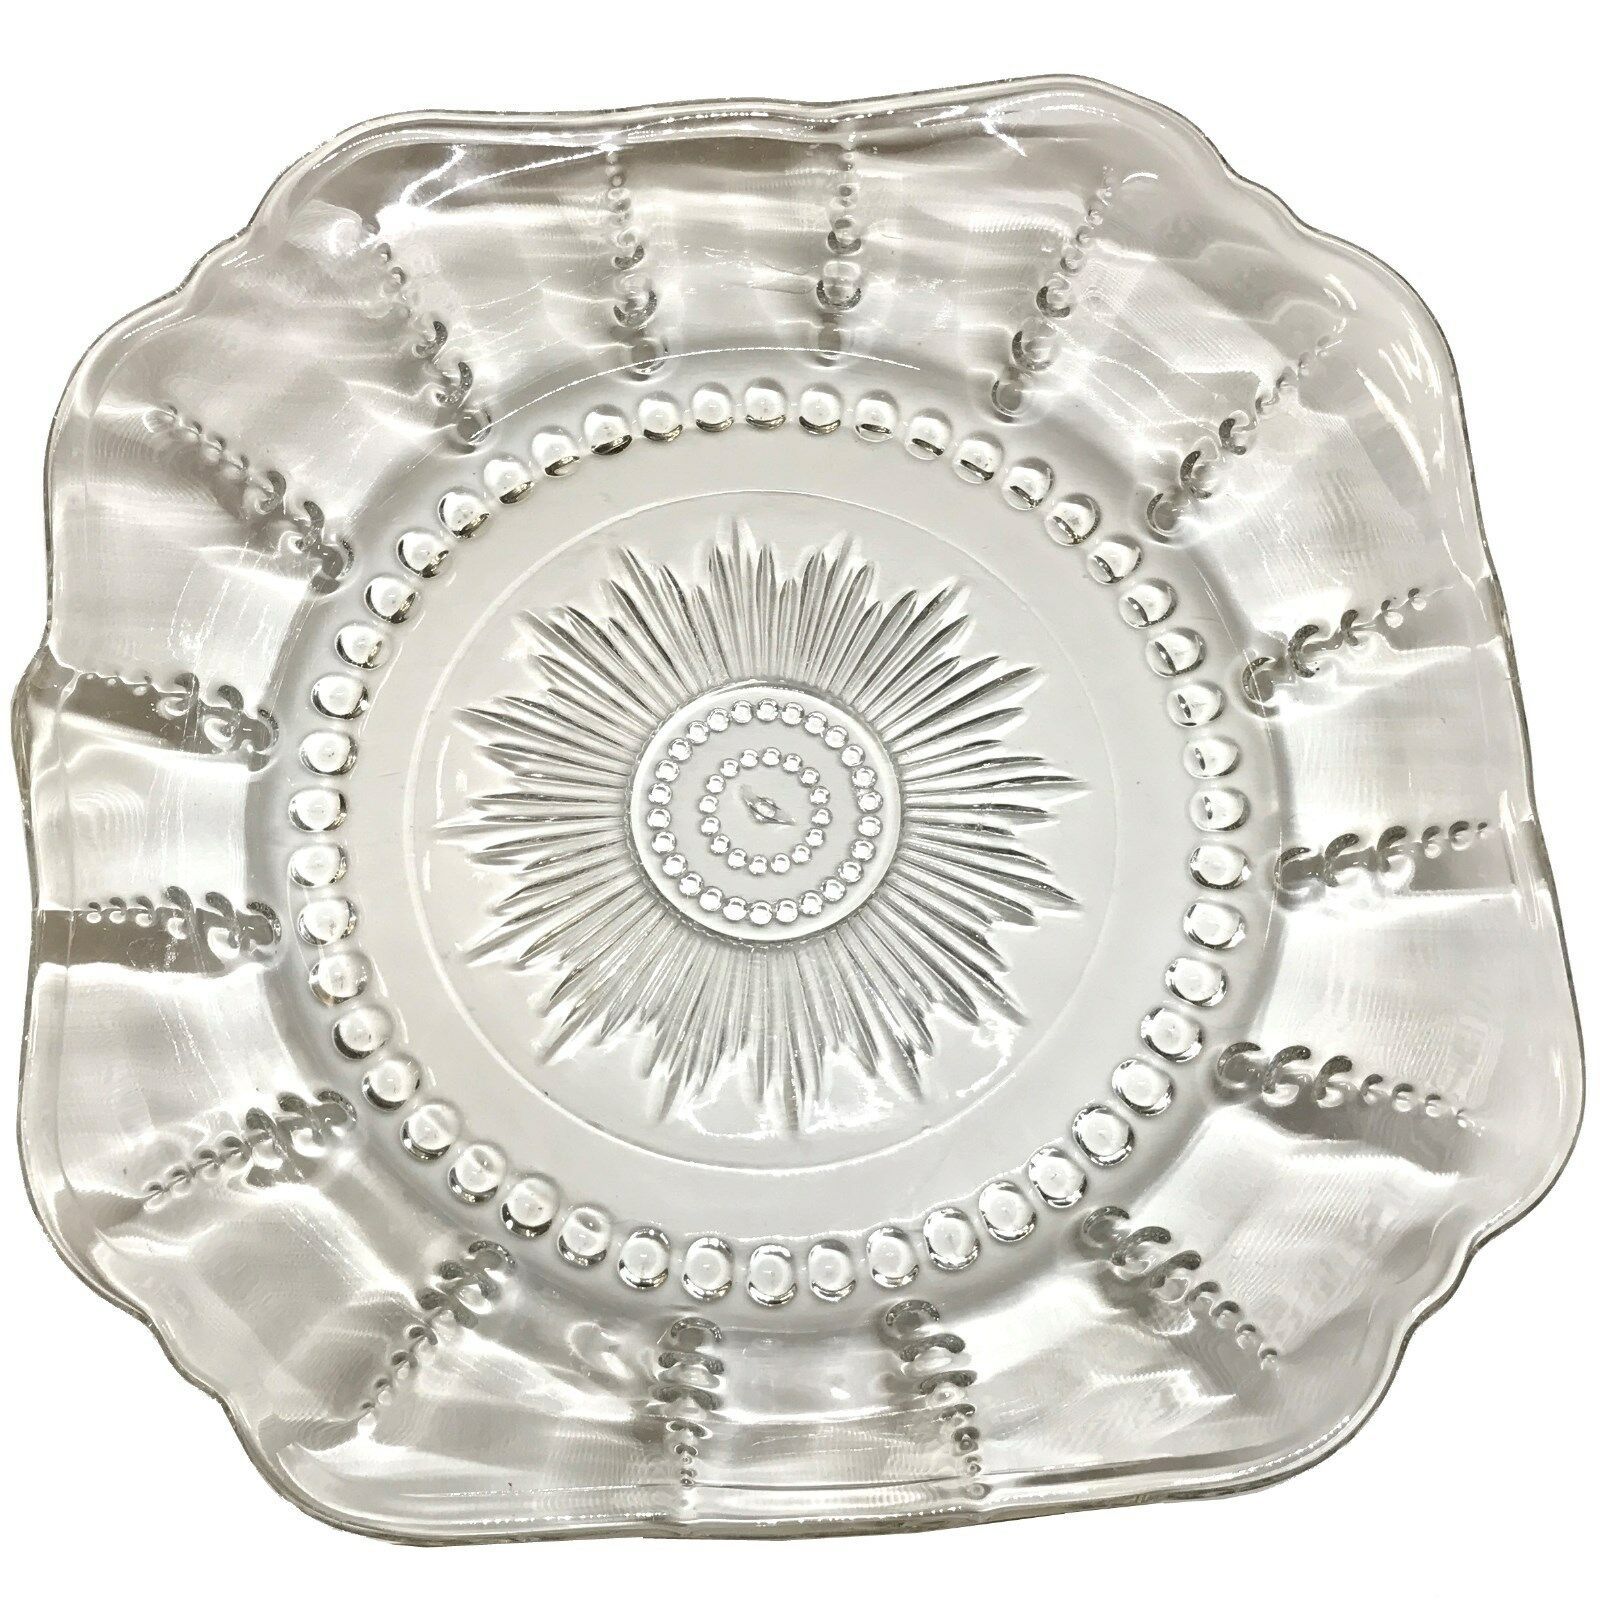 Federal Depression Crystal Glass Columbia 8 1/2" Soup Salad Bowl, EXCELLENT COND - $14.95